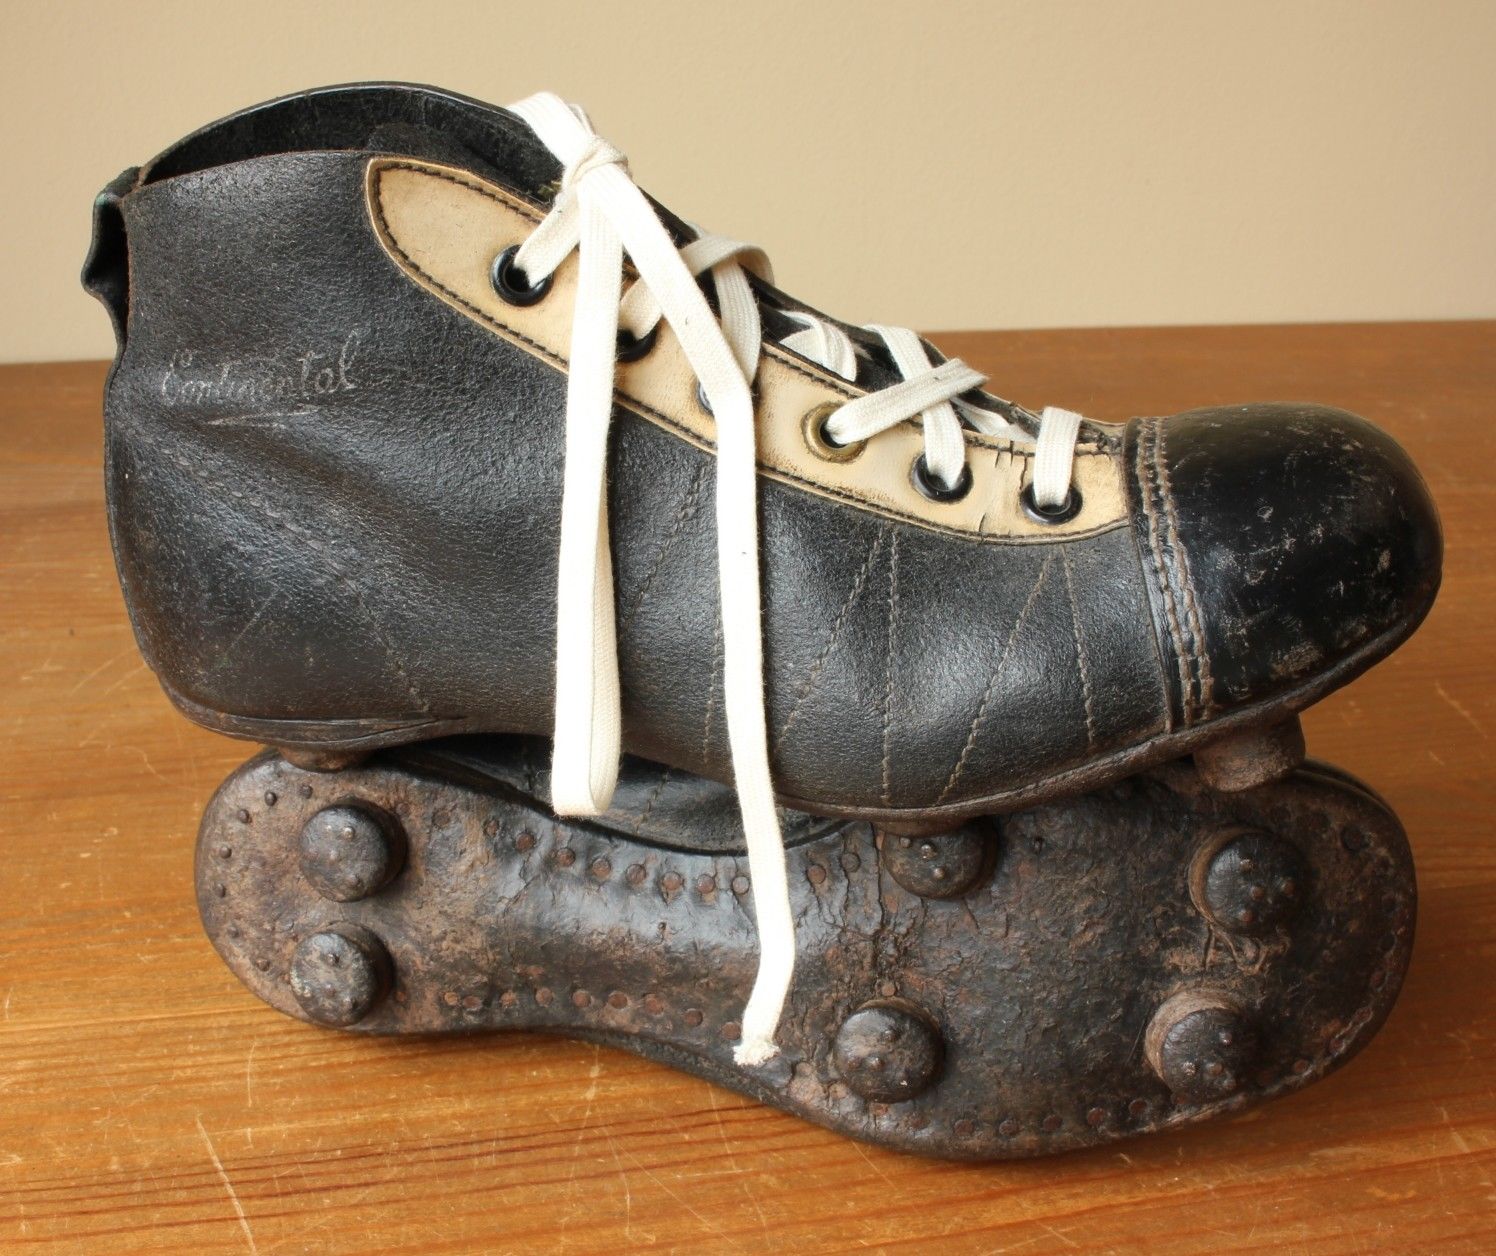 old football boots